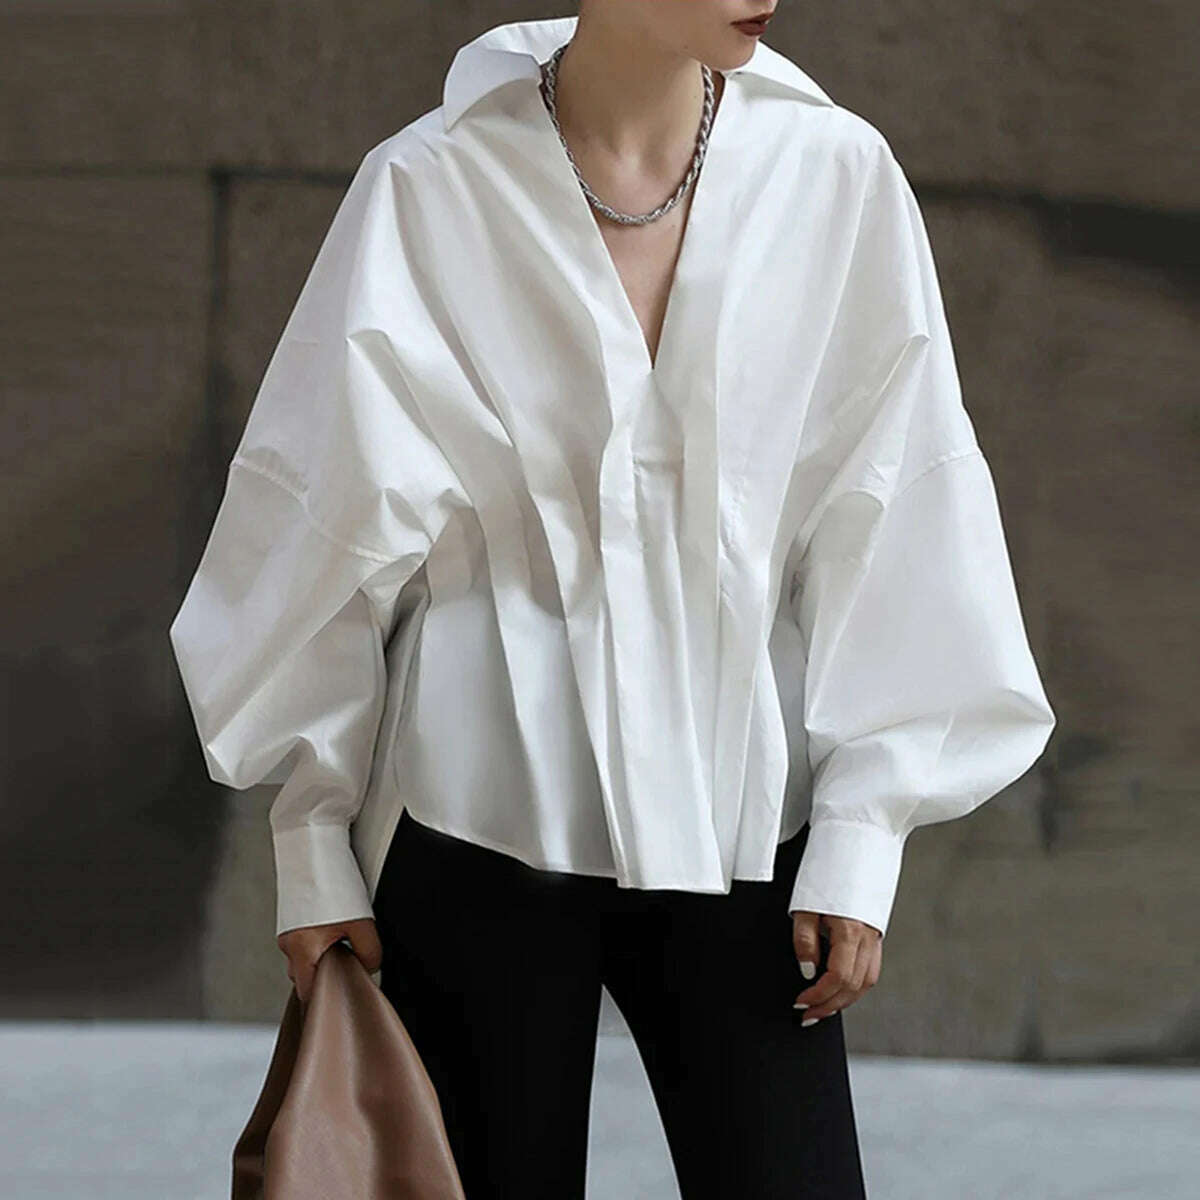 KIMLUD, Yeezzi Fashion Pleated White Blouses Female Casual V-neck Long Sleeves Loose Lapel Collar Shirt Tops For Women 2023 New, WHITE / One Size, KIMLUD Women's Clothes